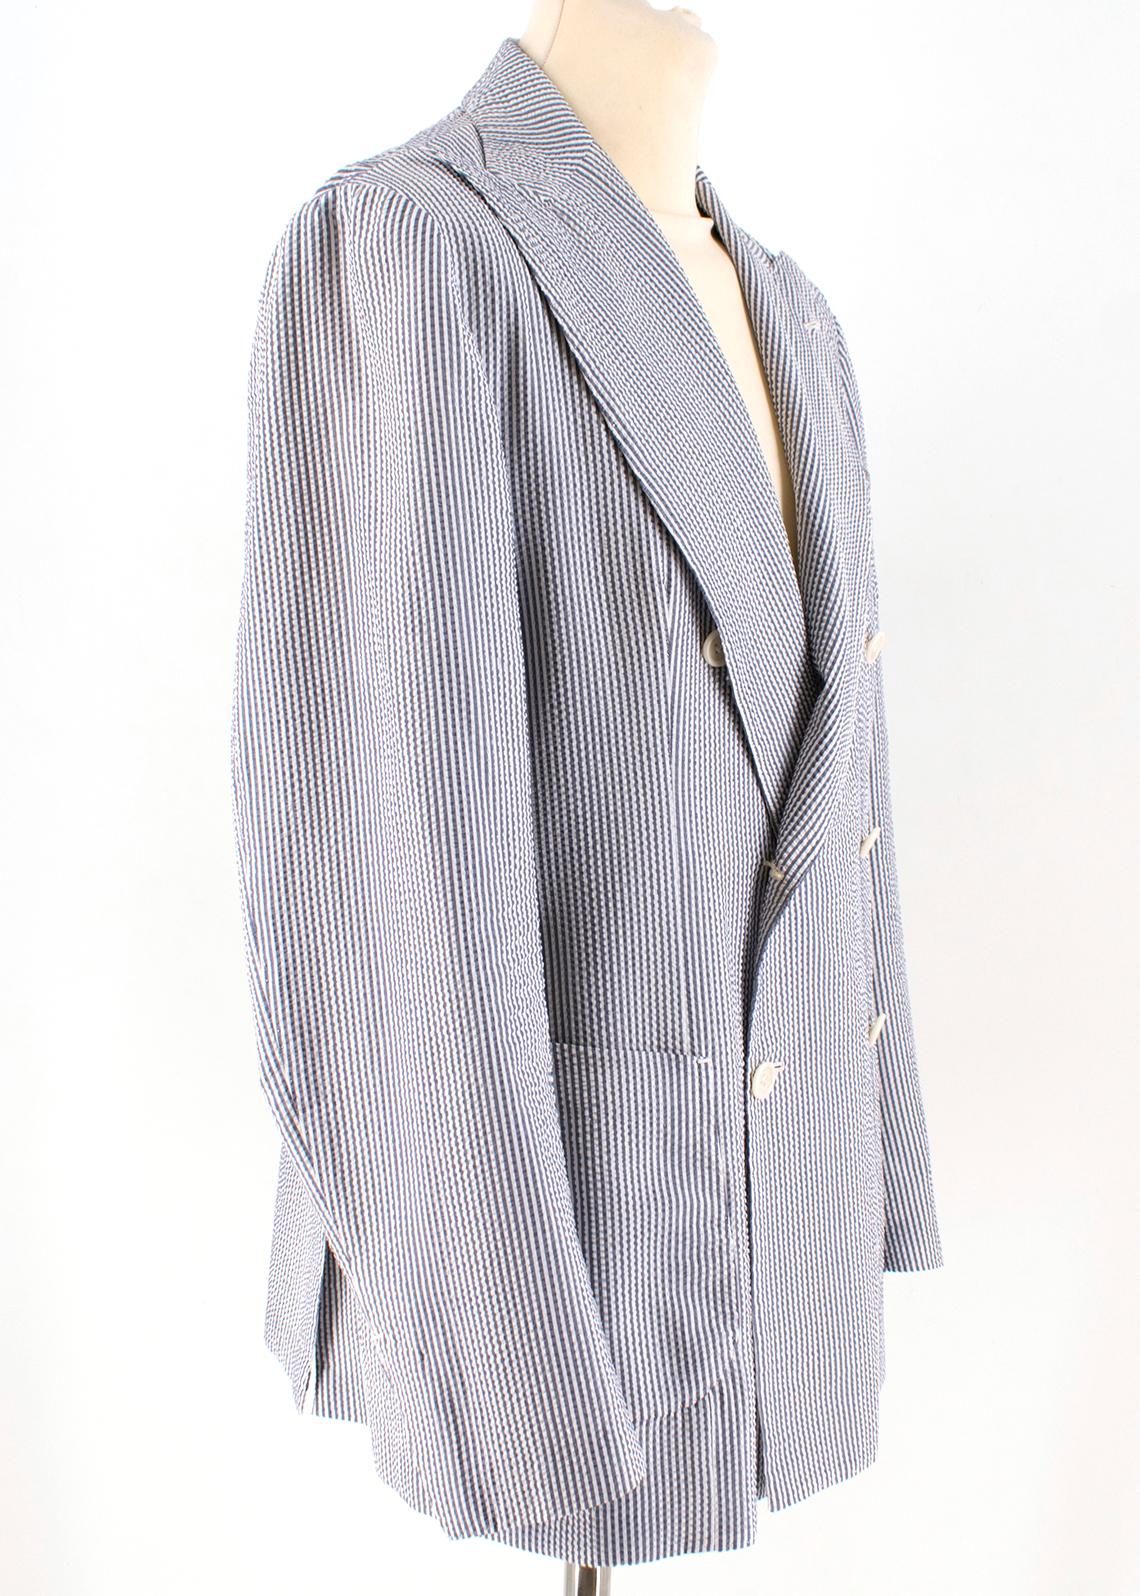 G. Inglese Blue Striped Blazer Shirt

- Blue and White Striped Blazer 
- Point lapel, double breasted 
- Seersucker cotton fabric
- Dual slip pocket at front, slit pocket at lining 
- Lightweight

Approx 
Measurements are taken laying flat, seam to